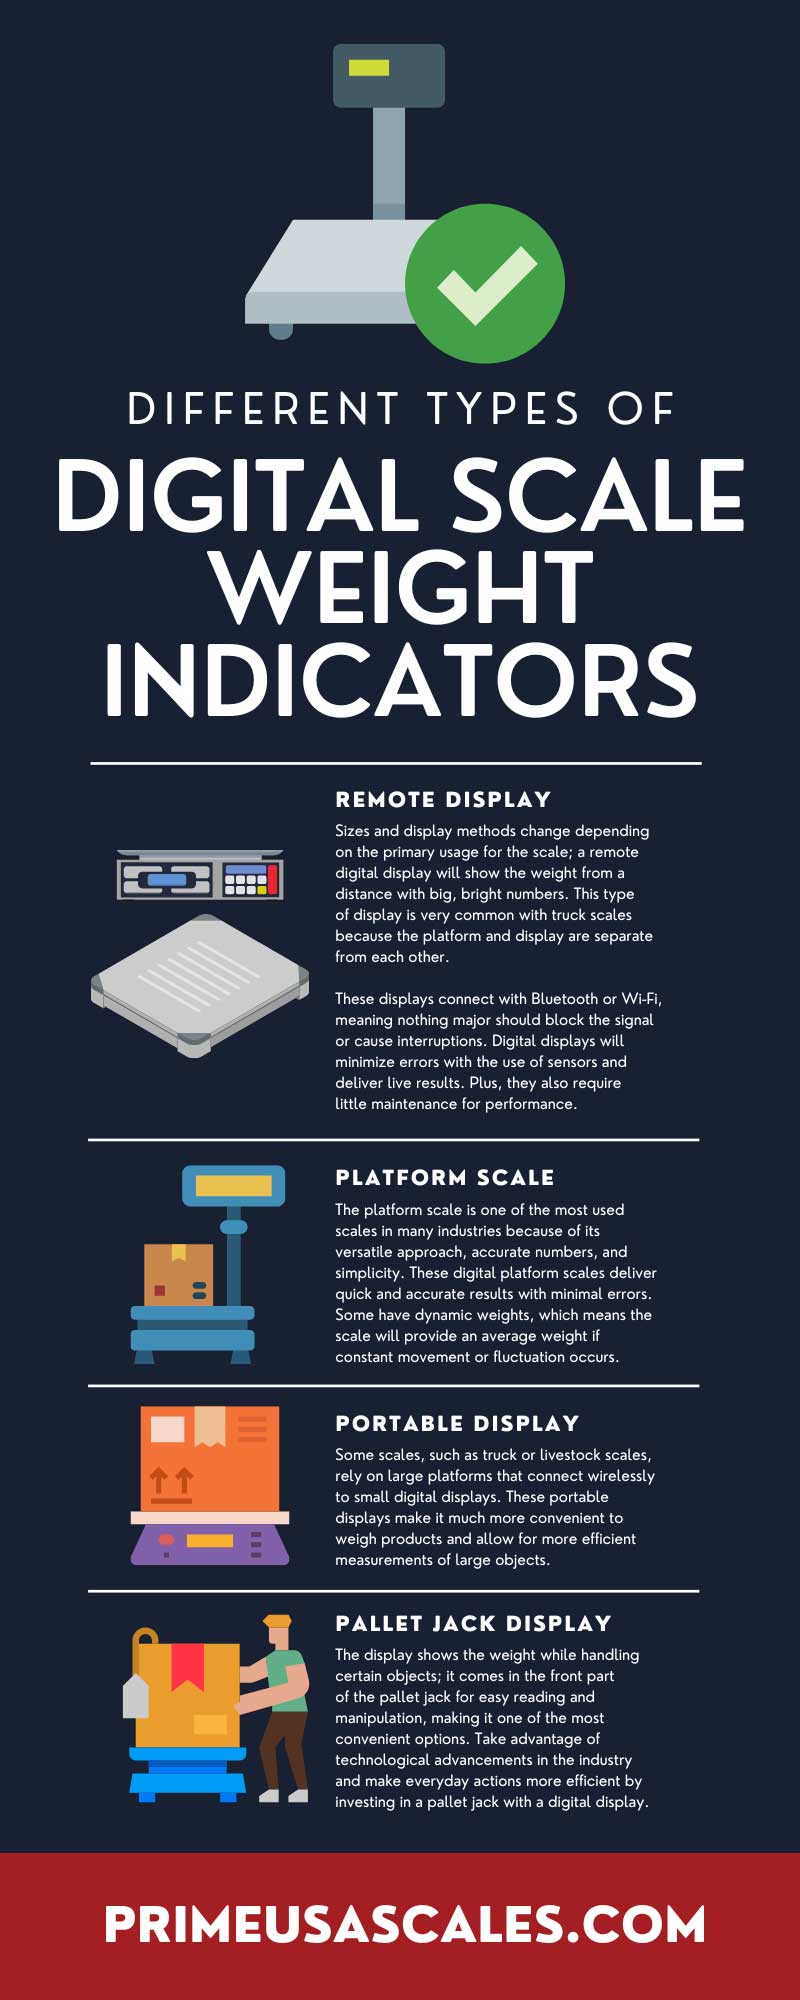 Different Types of Digital Scale Weight Indicators